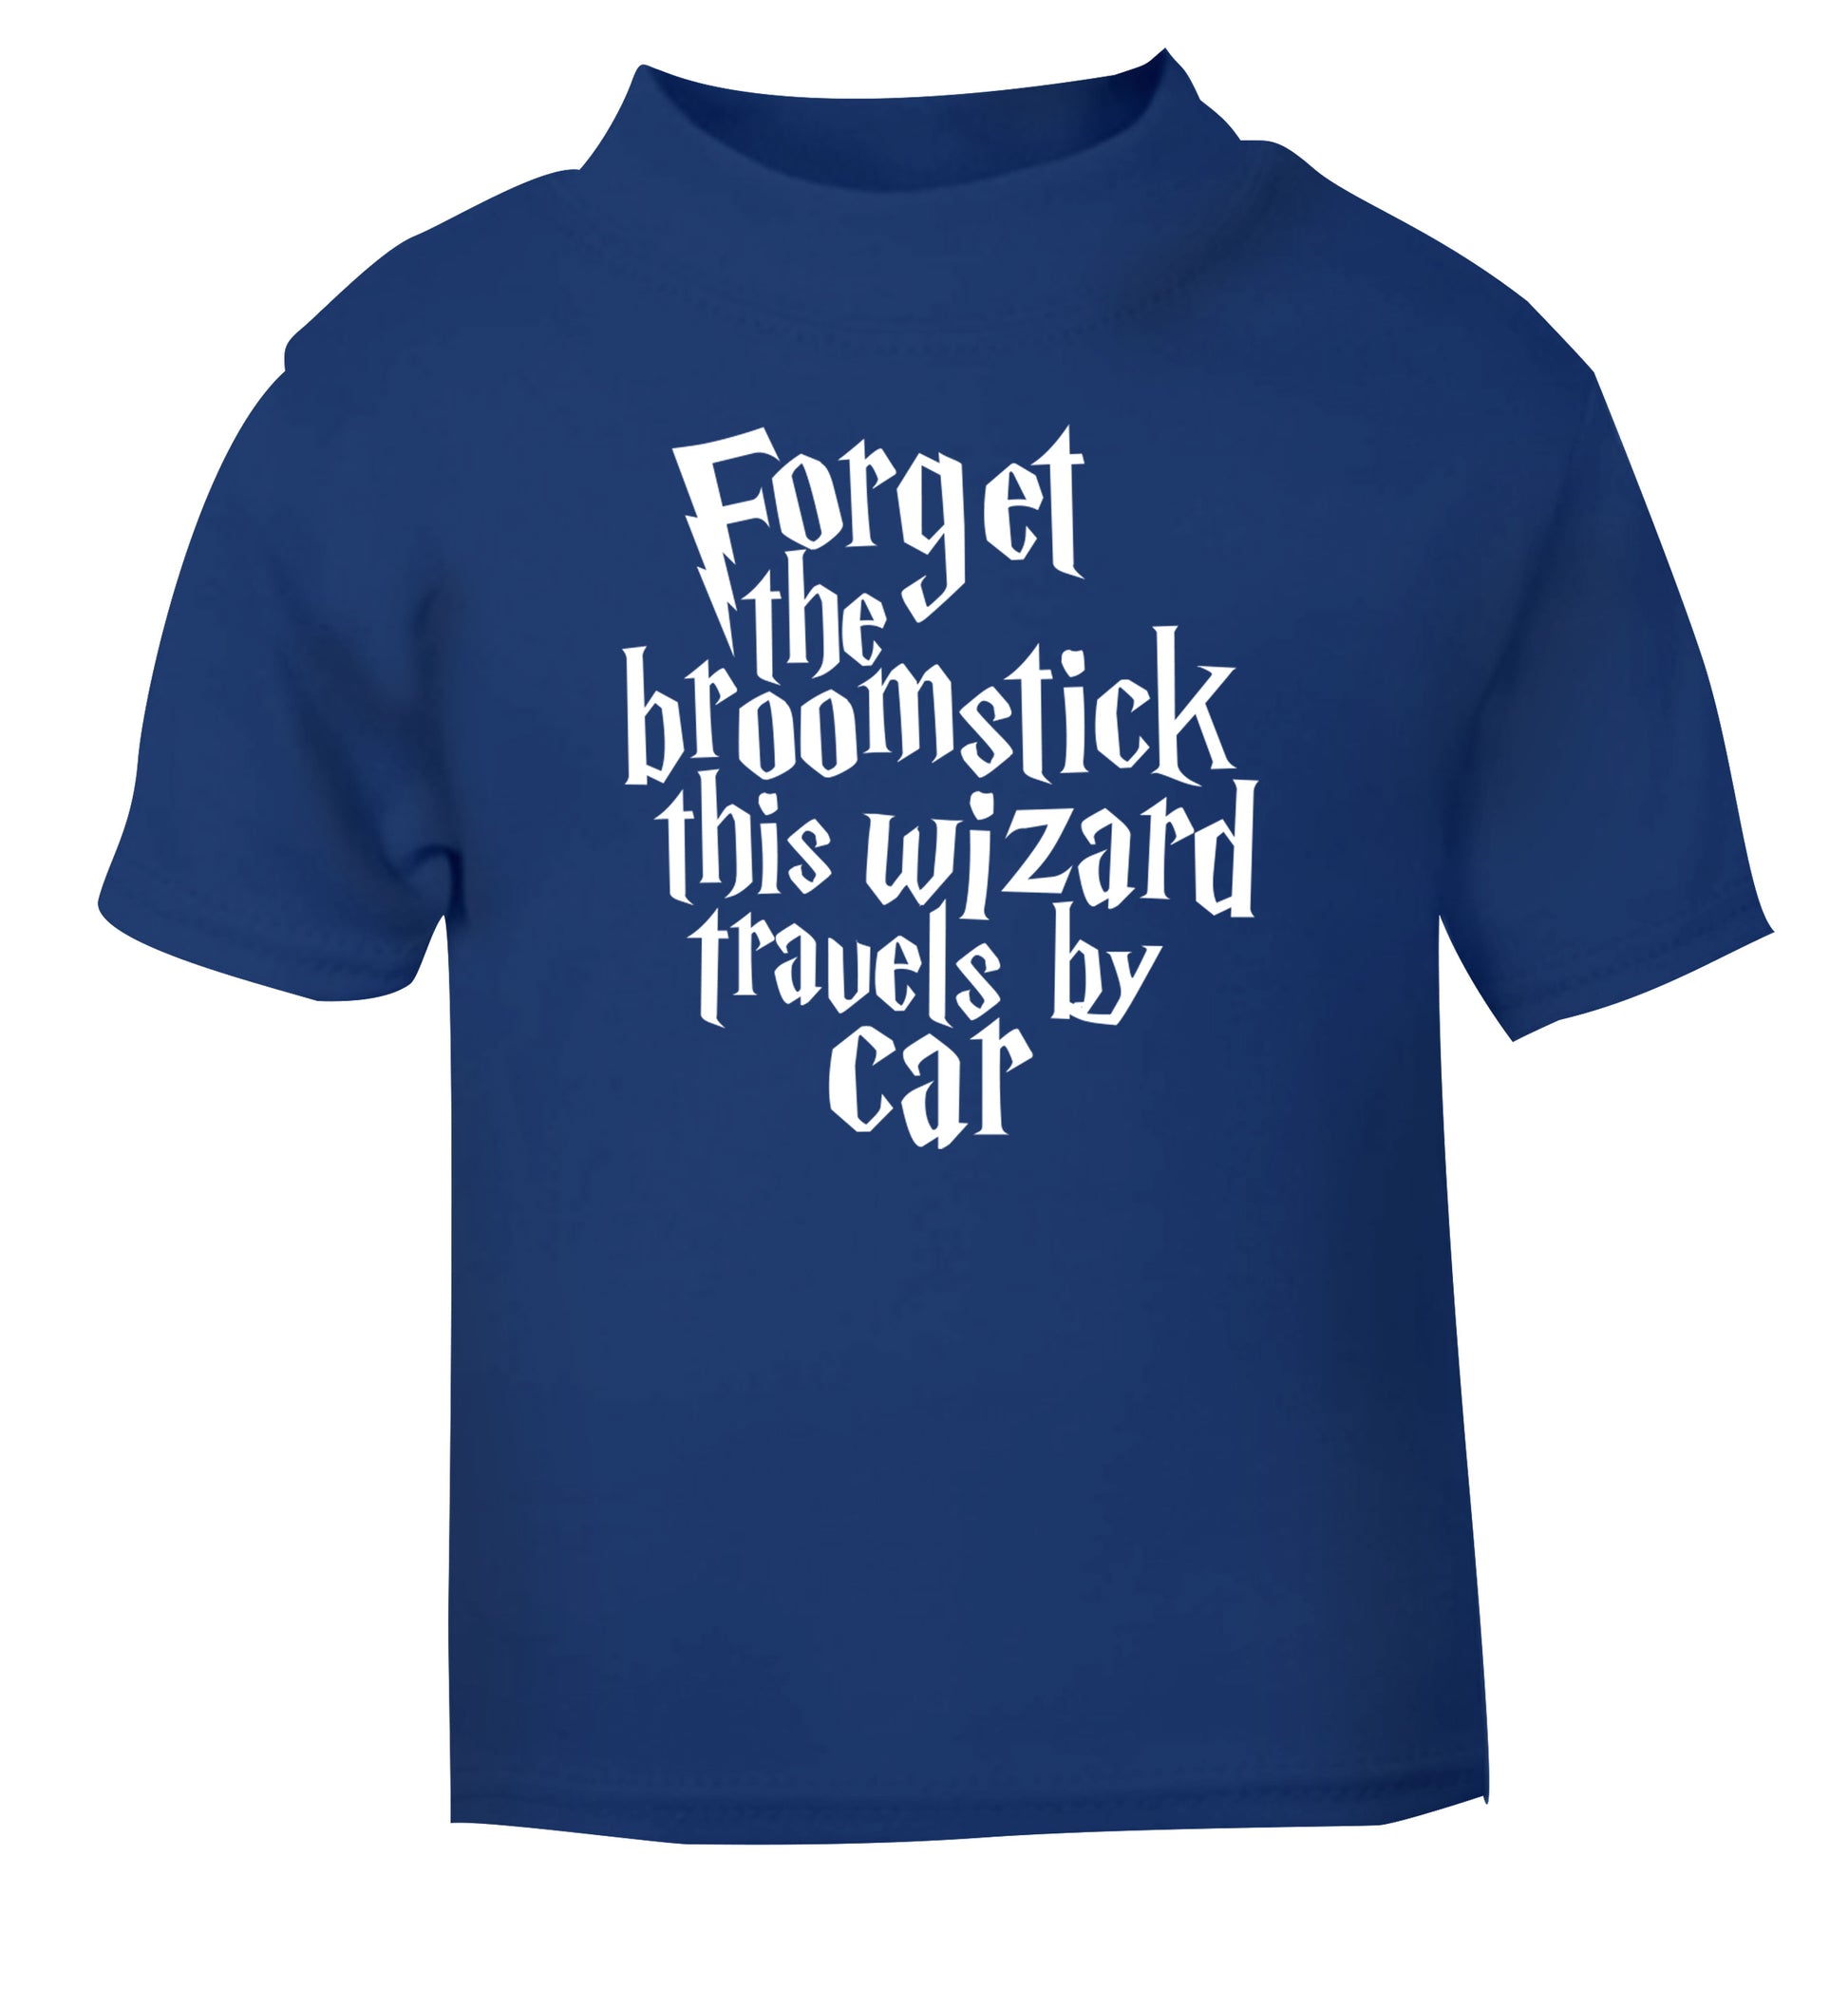 Forget the broomstick this wizard travels by car blue Baby Toddler Tshirt 2 Years